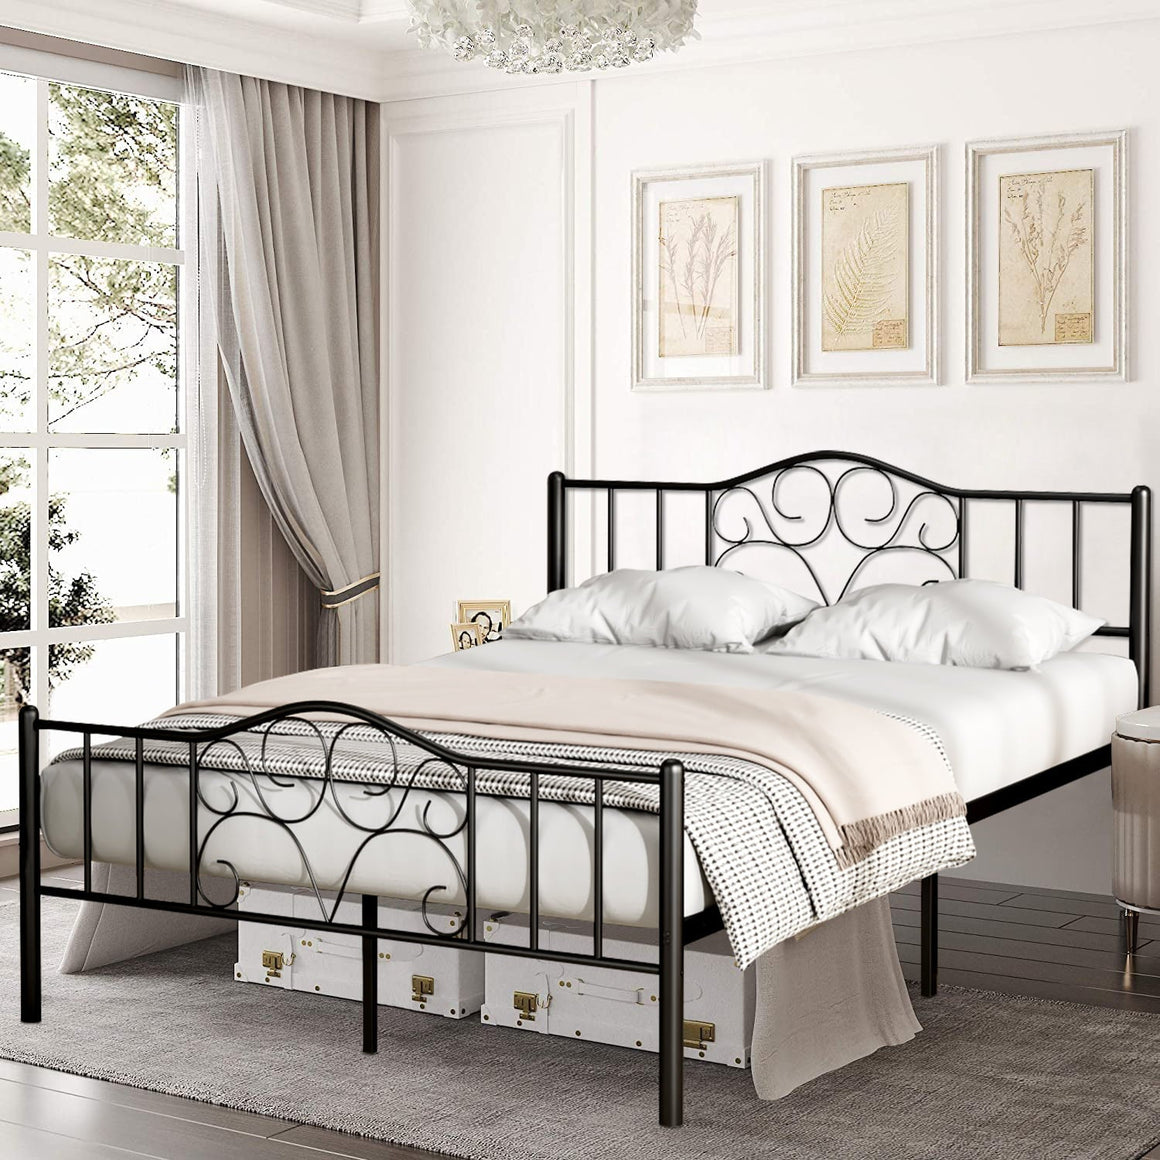 Queen Size Metal Bed Frame, Bed Frame with Headboard and Footboard, Queen Bed Frame No Box Spring Needed, Platform Bed Frame for Kids Adult, Iron Bed Frame for Modern Bedroom Furniture, Black